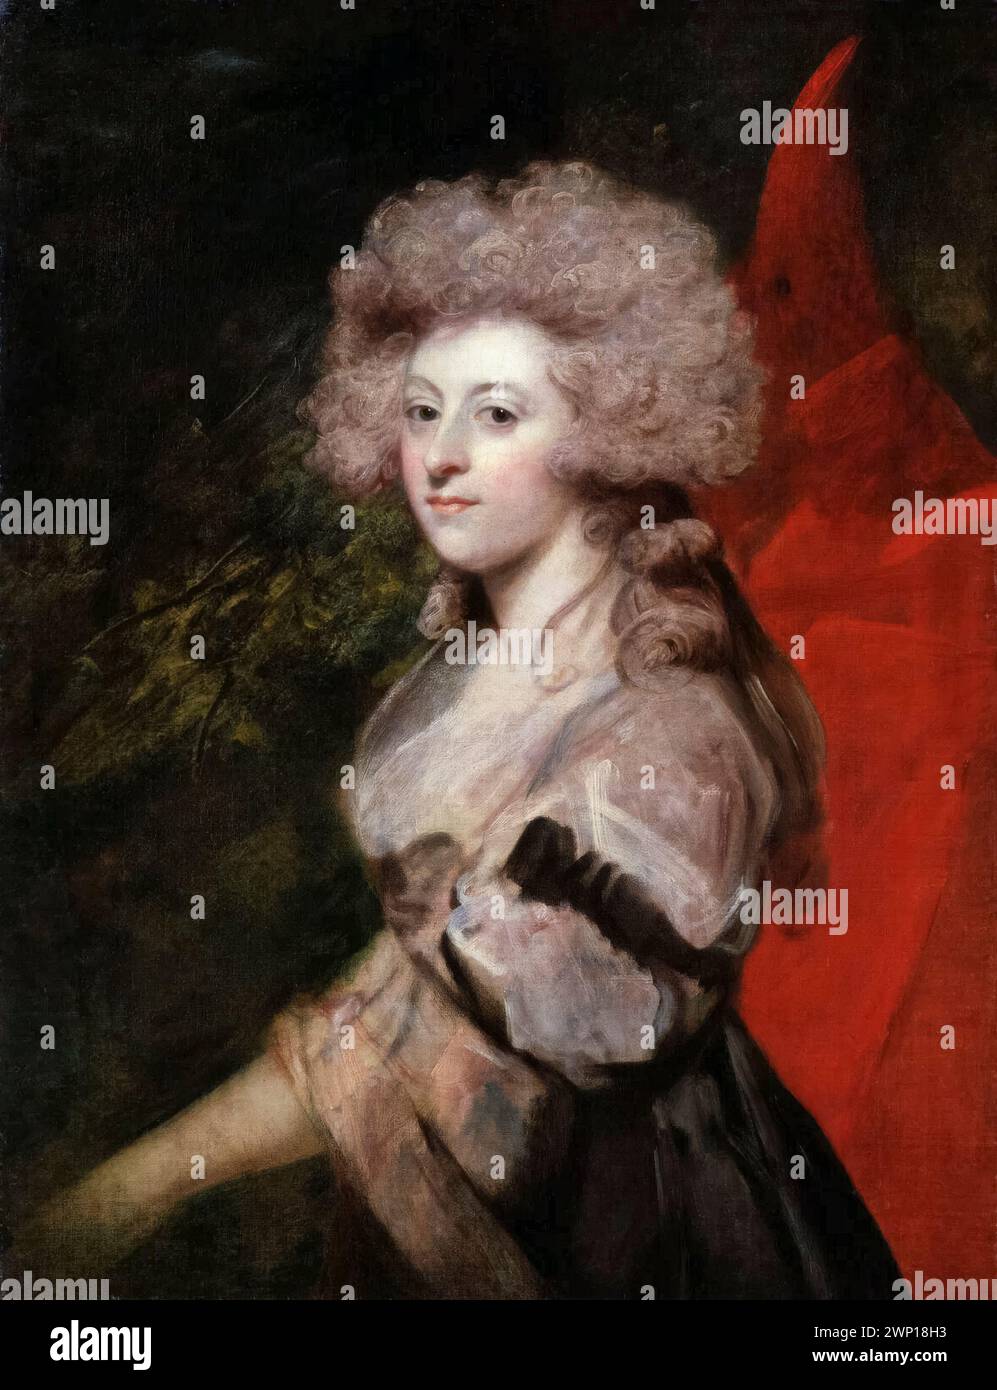 Maria Anne Fitzherbert (née Smythe, previously Weld, 1756-1837), mistress of George IV of the United Kingdom, portrait painting in oil on canvas by Sir Joshua Reynolds, circa 1788 Stock Photo